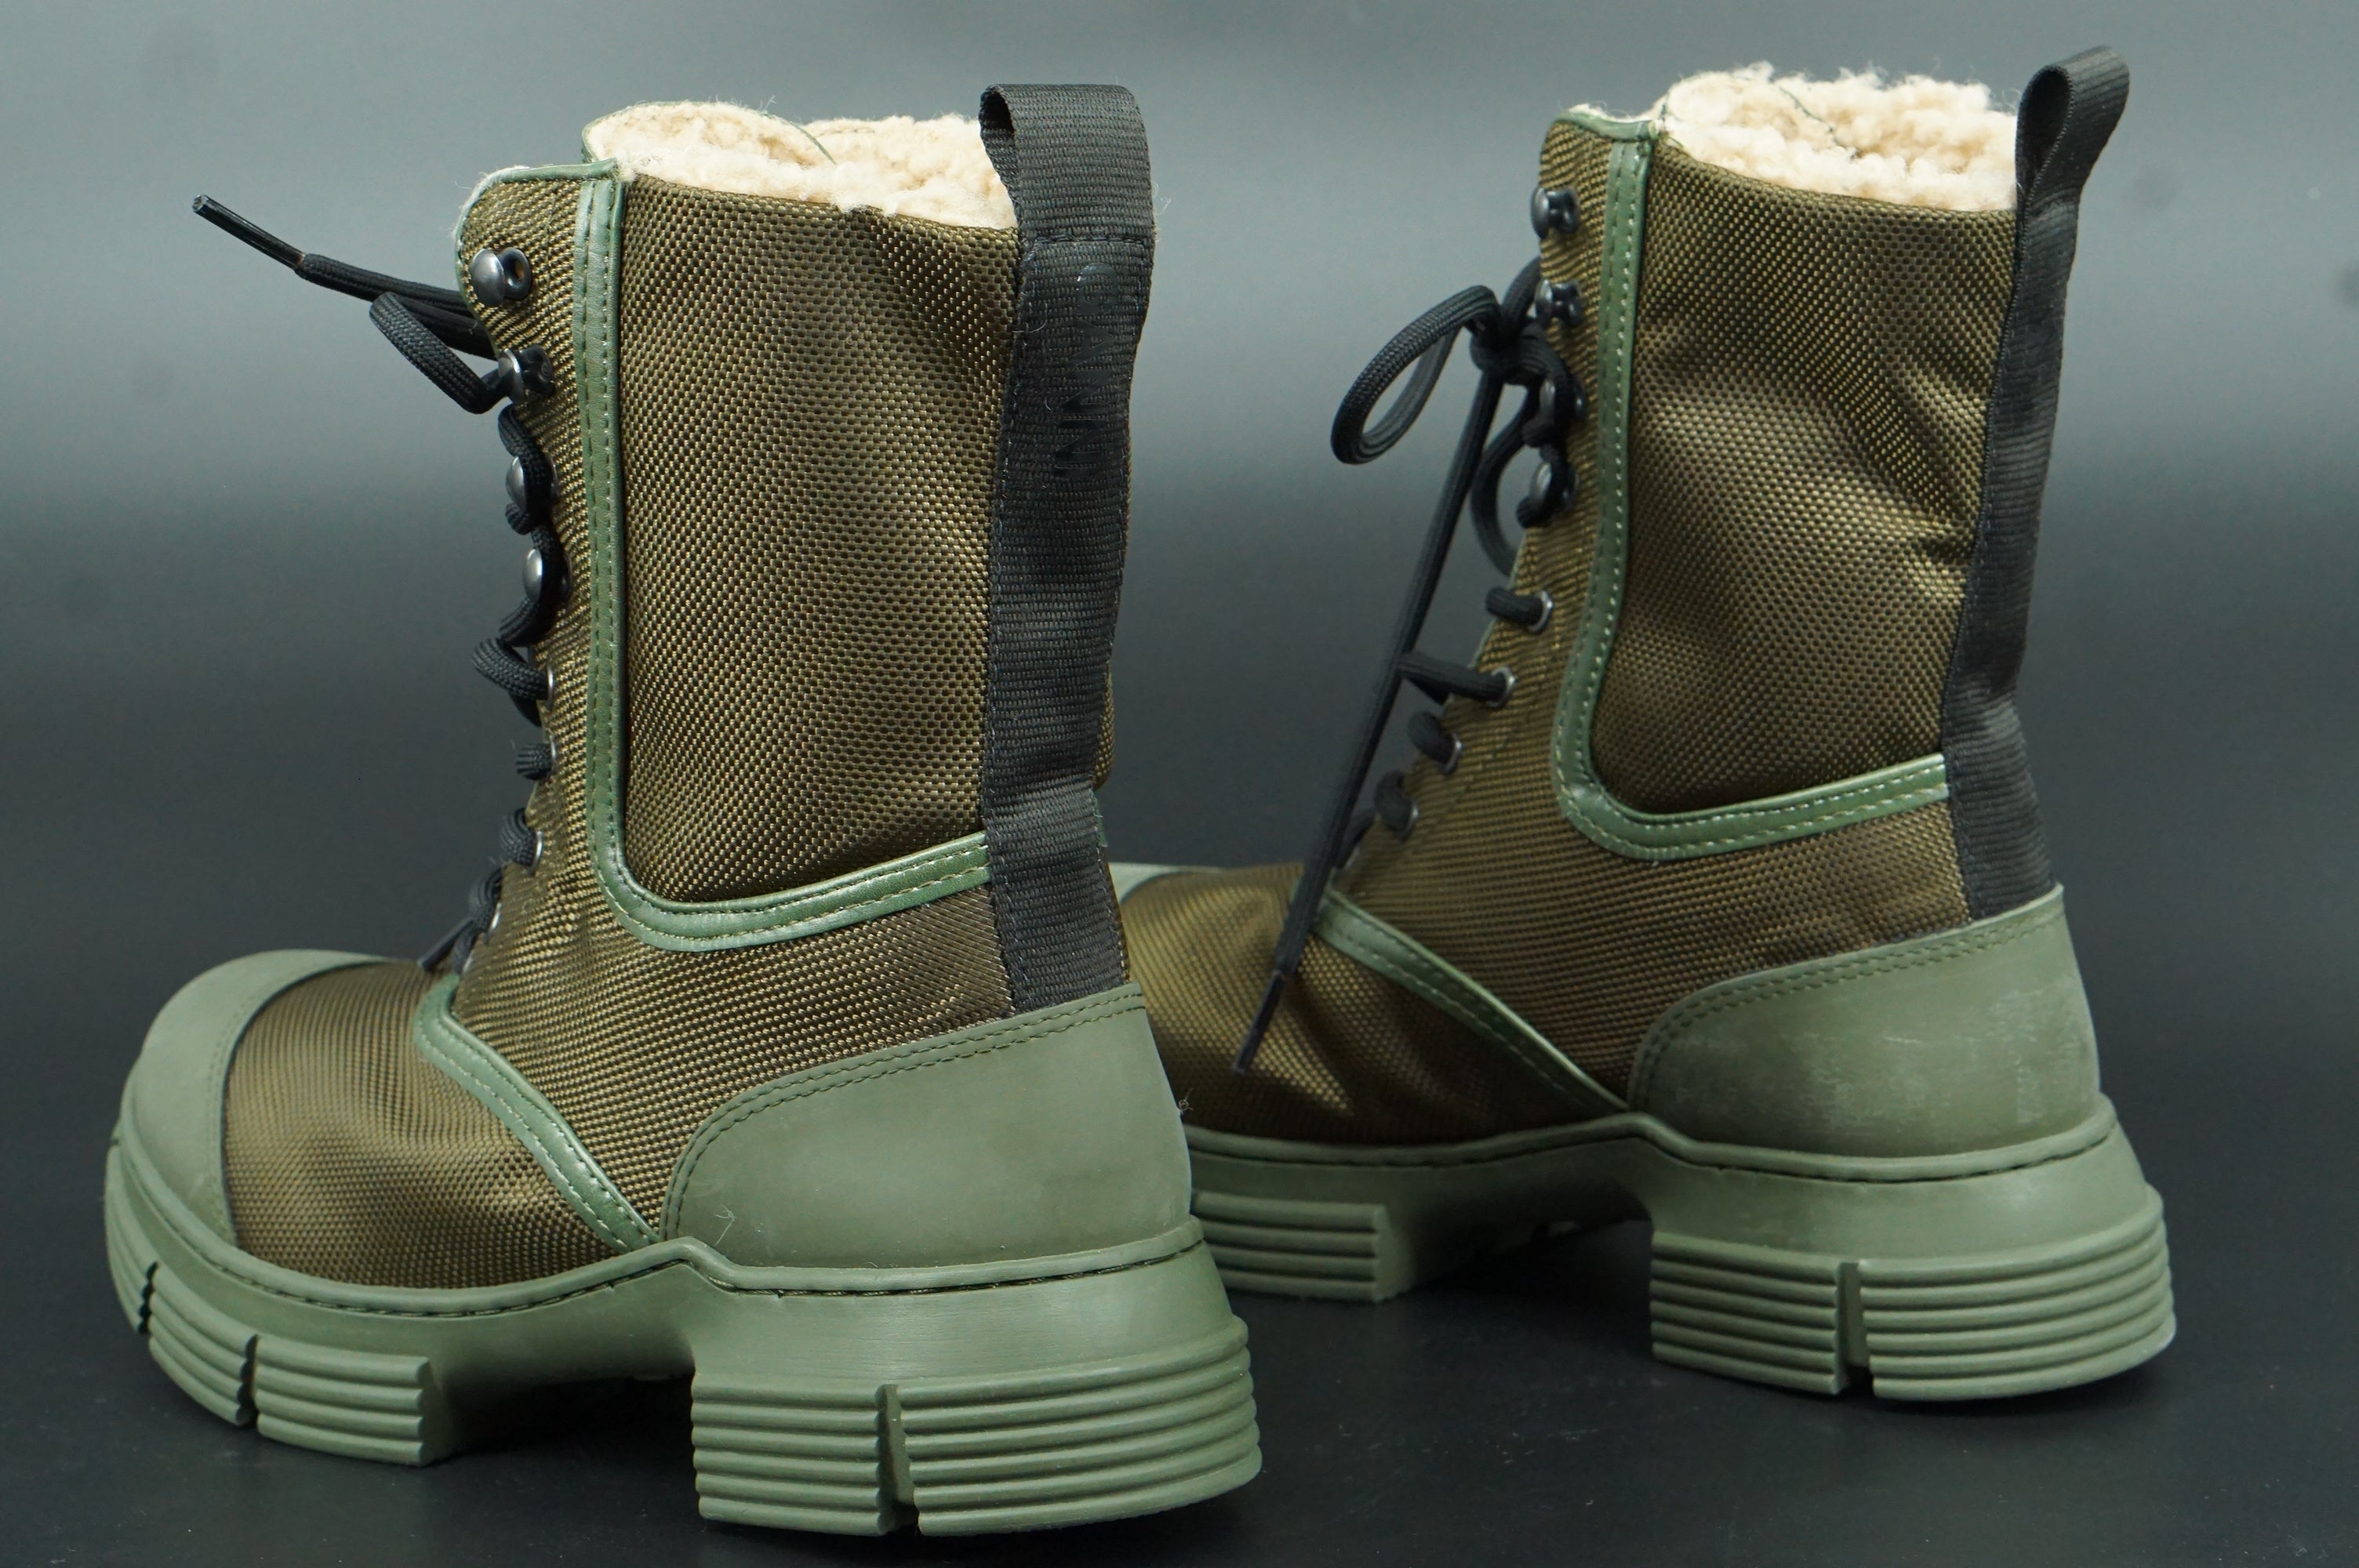 GANNI Shearling Hiking Ankle Combat Boots Size 36 New $375 Green Tubular Rubber